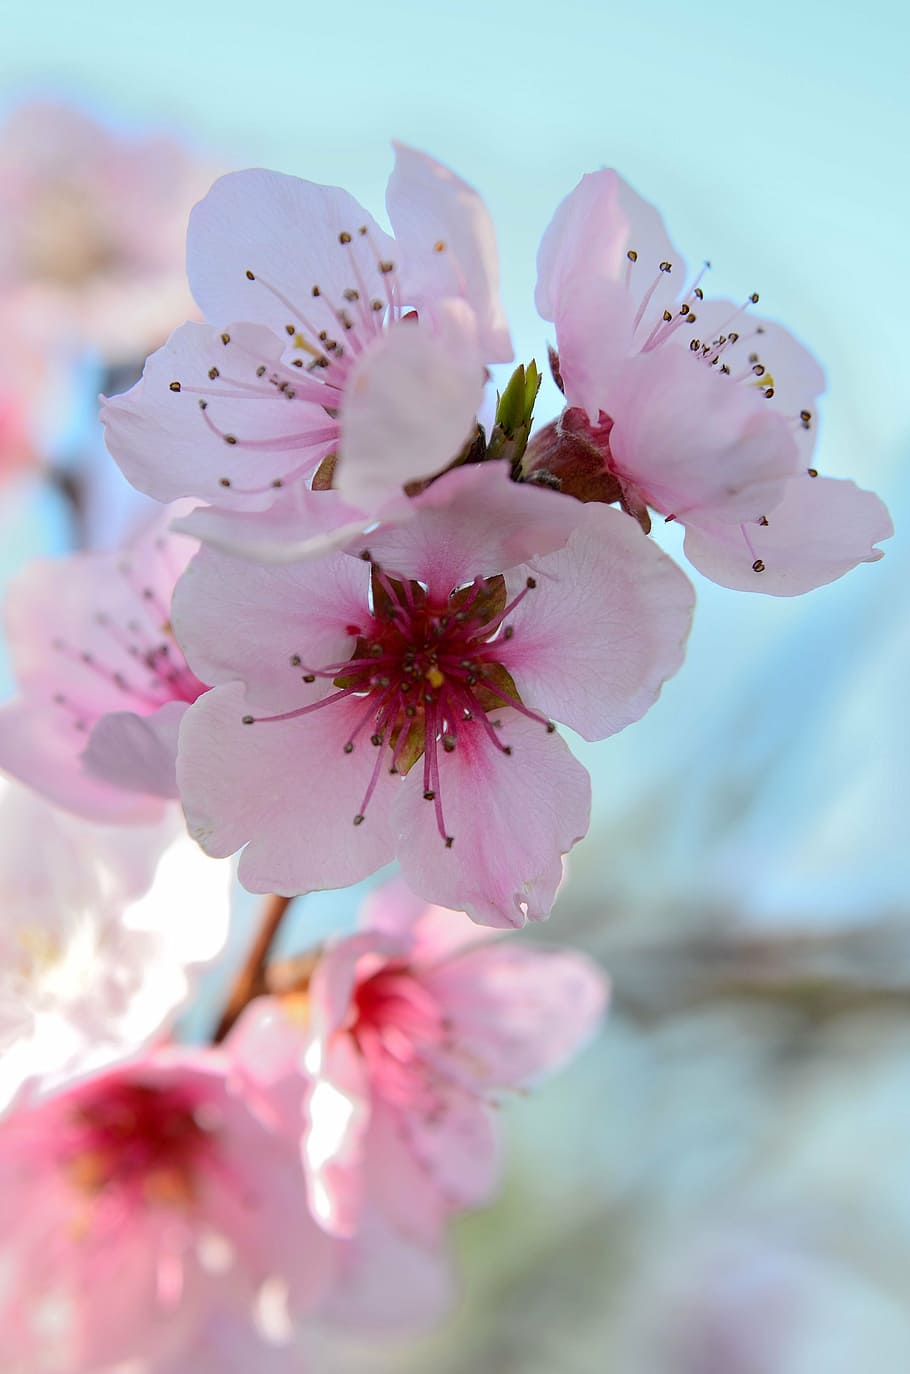 white-and-pink cherry blossoms in close-up photography, fiori di pesco